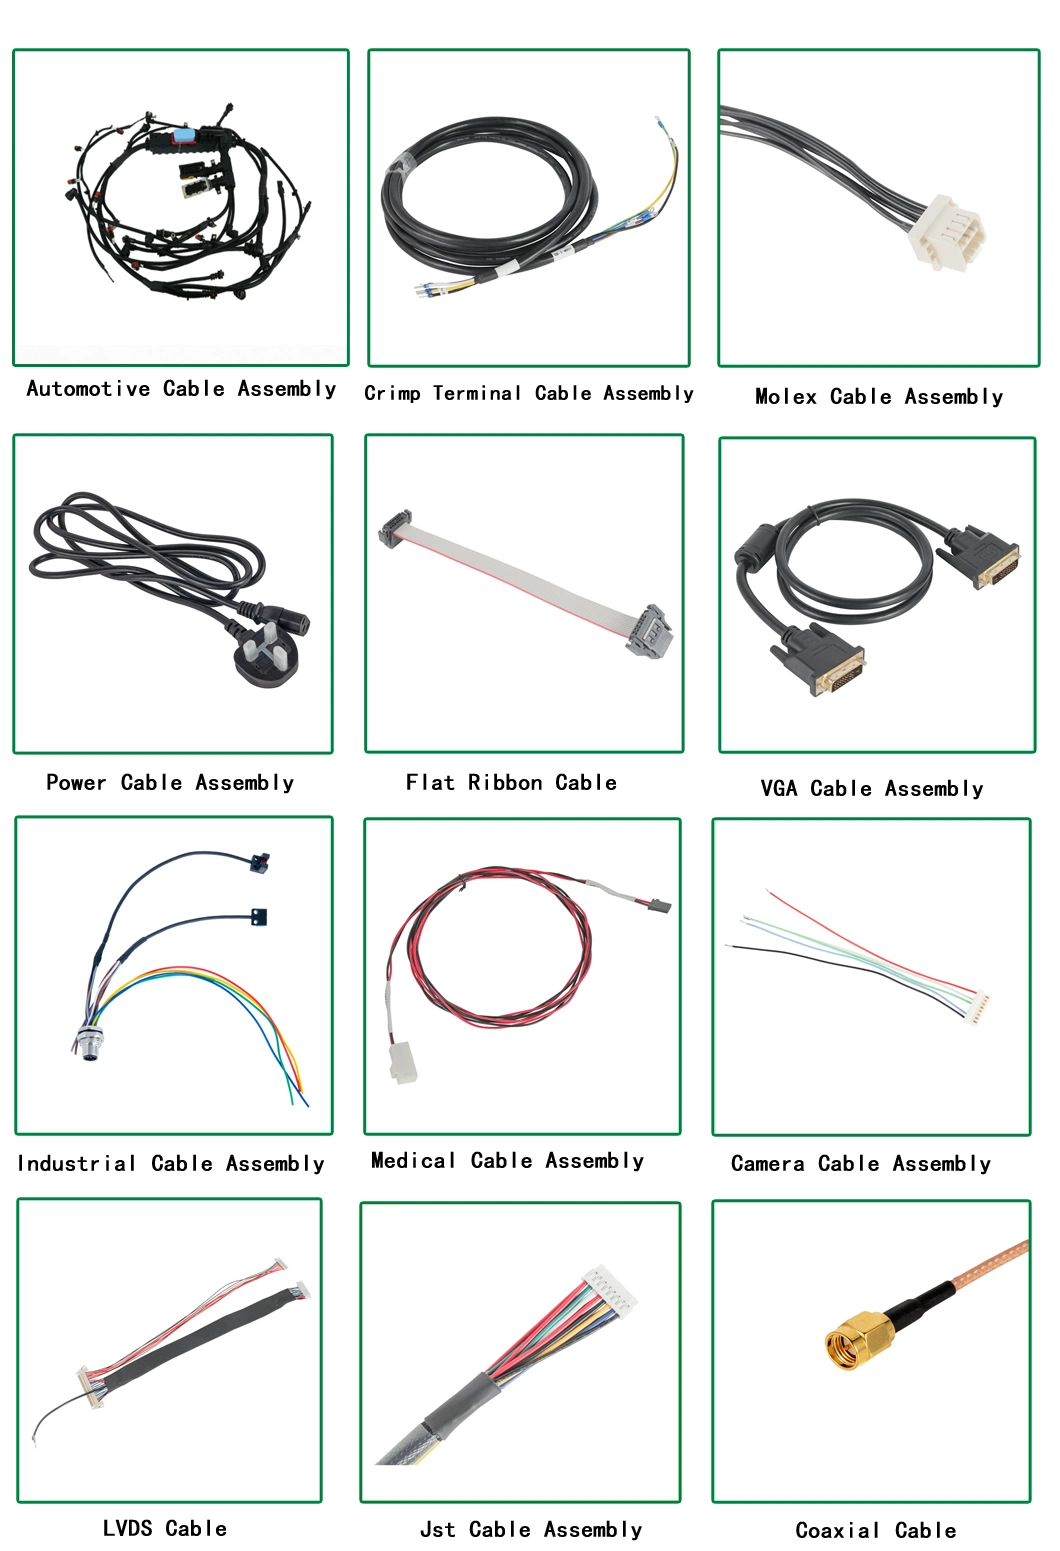 Expert Manufacturer of Jst Molex Connector Medical Home Appliance Industrial Cable Assembly and Automotive Wiring Harness